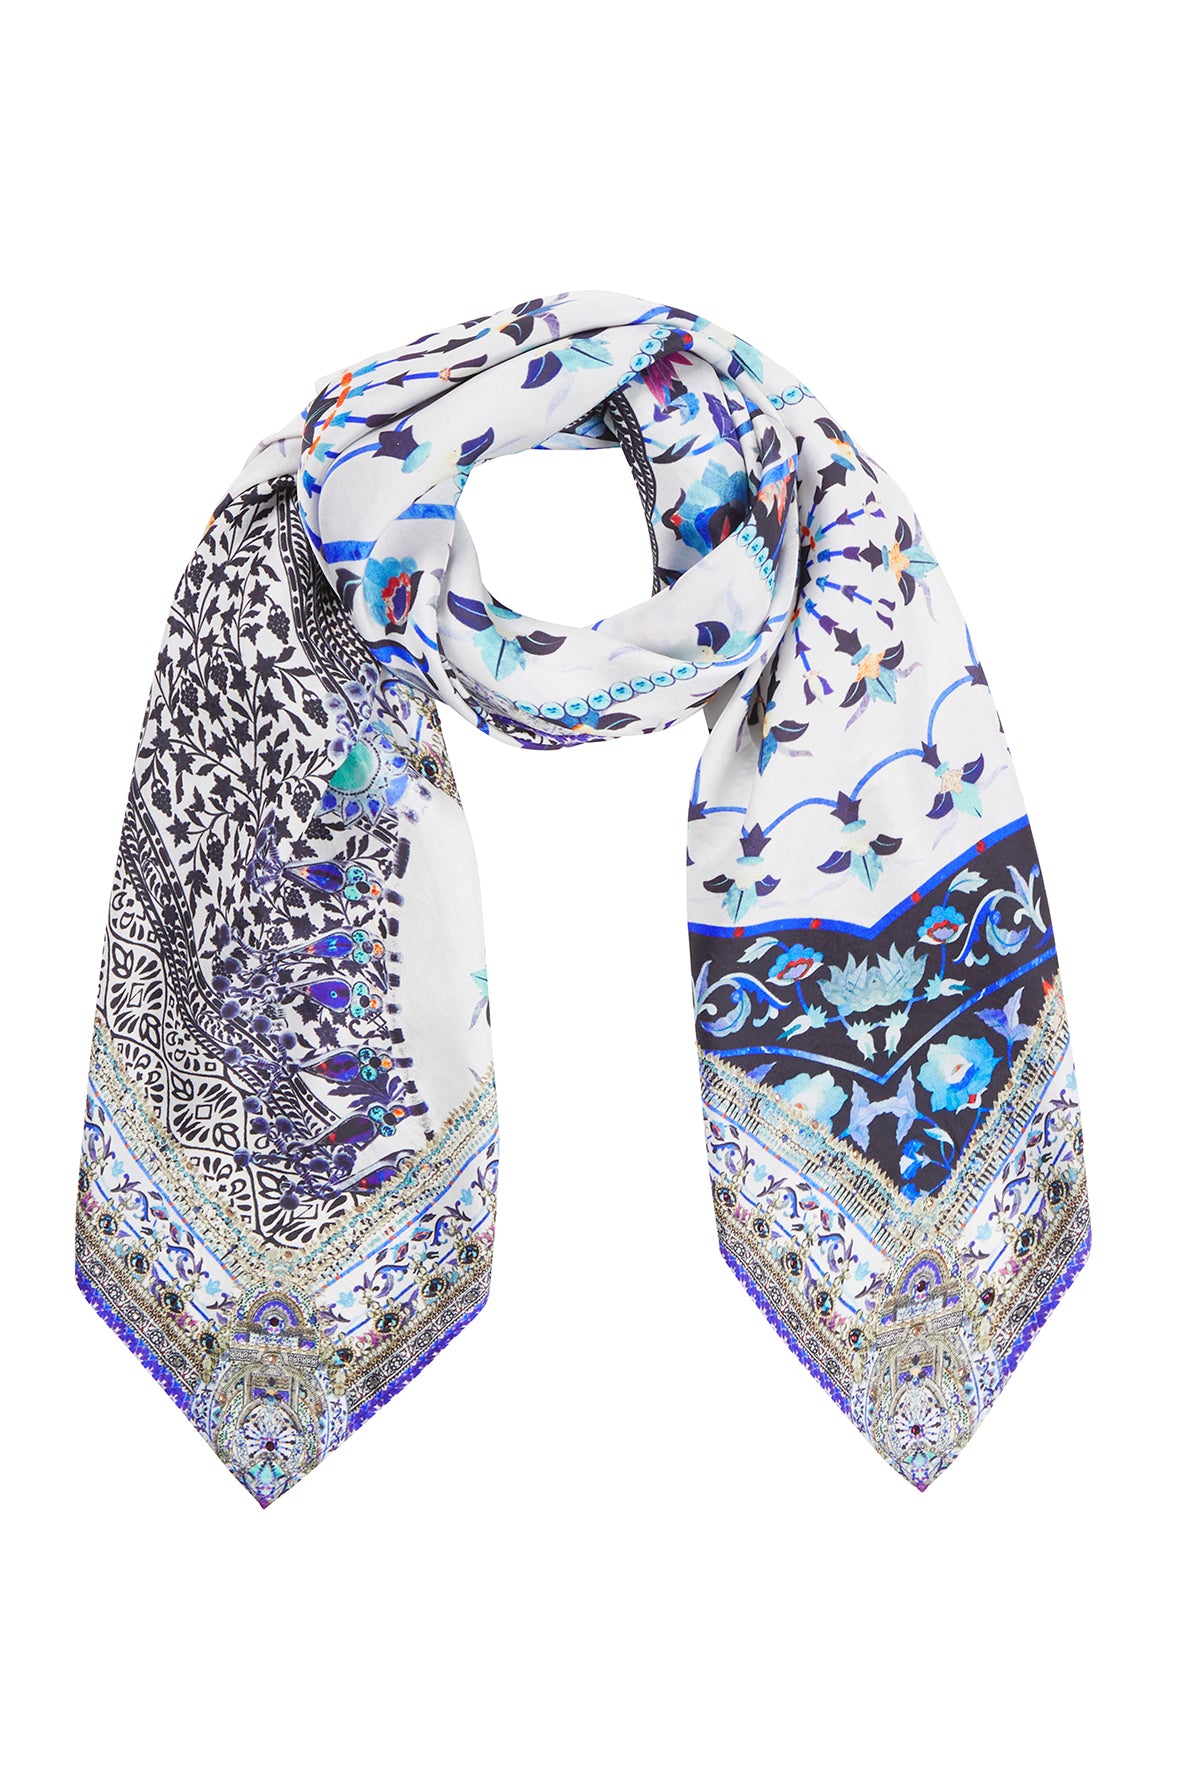 IN THE CONSTELLATIONS LARGE SQUARE SCARF